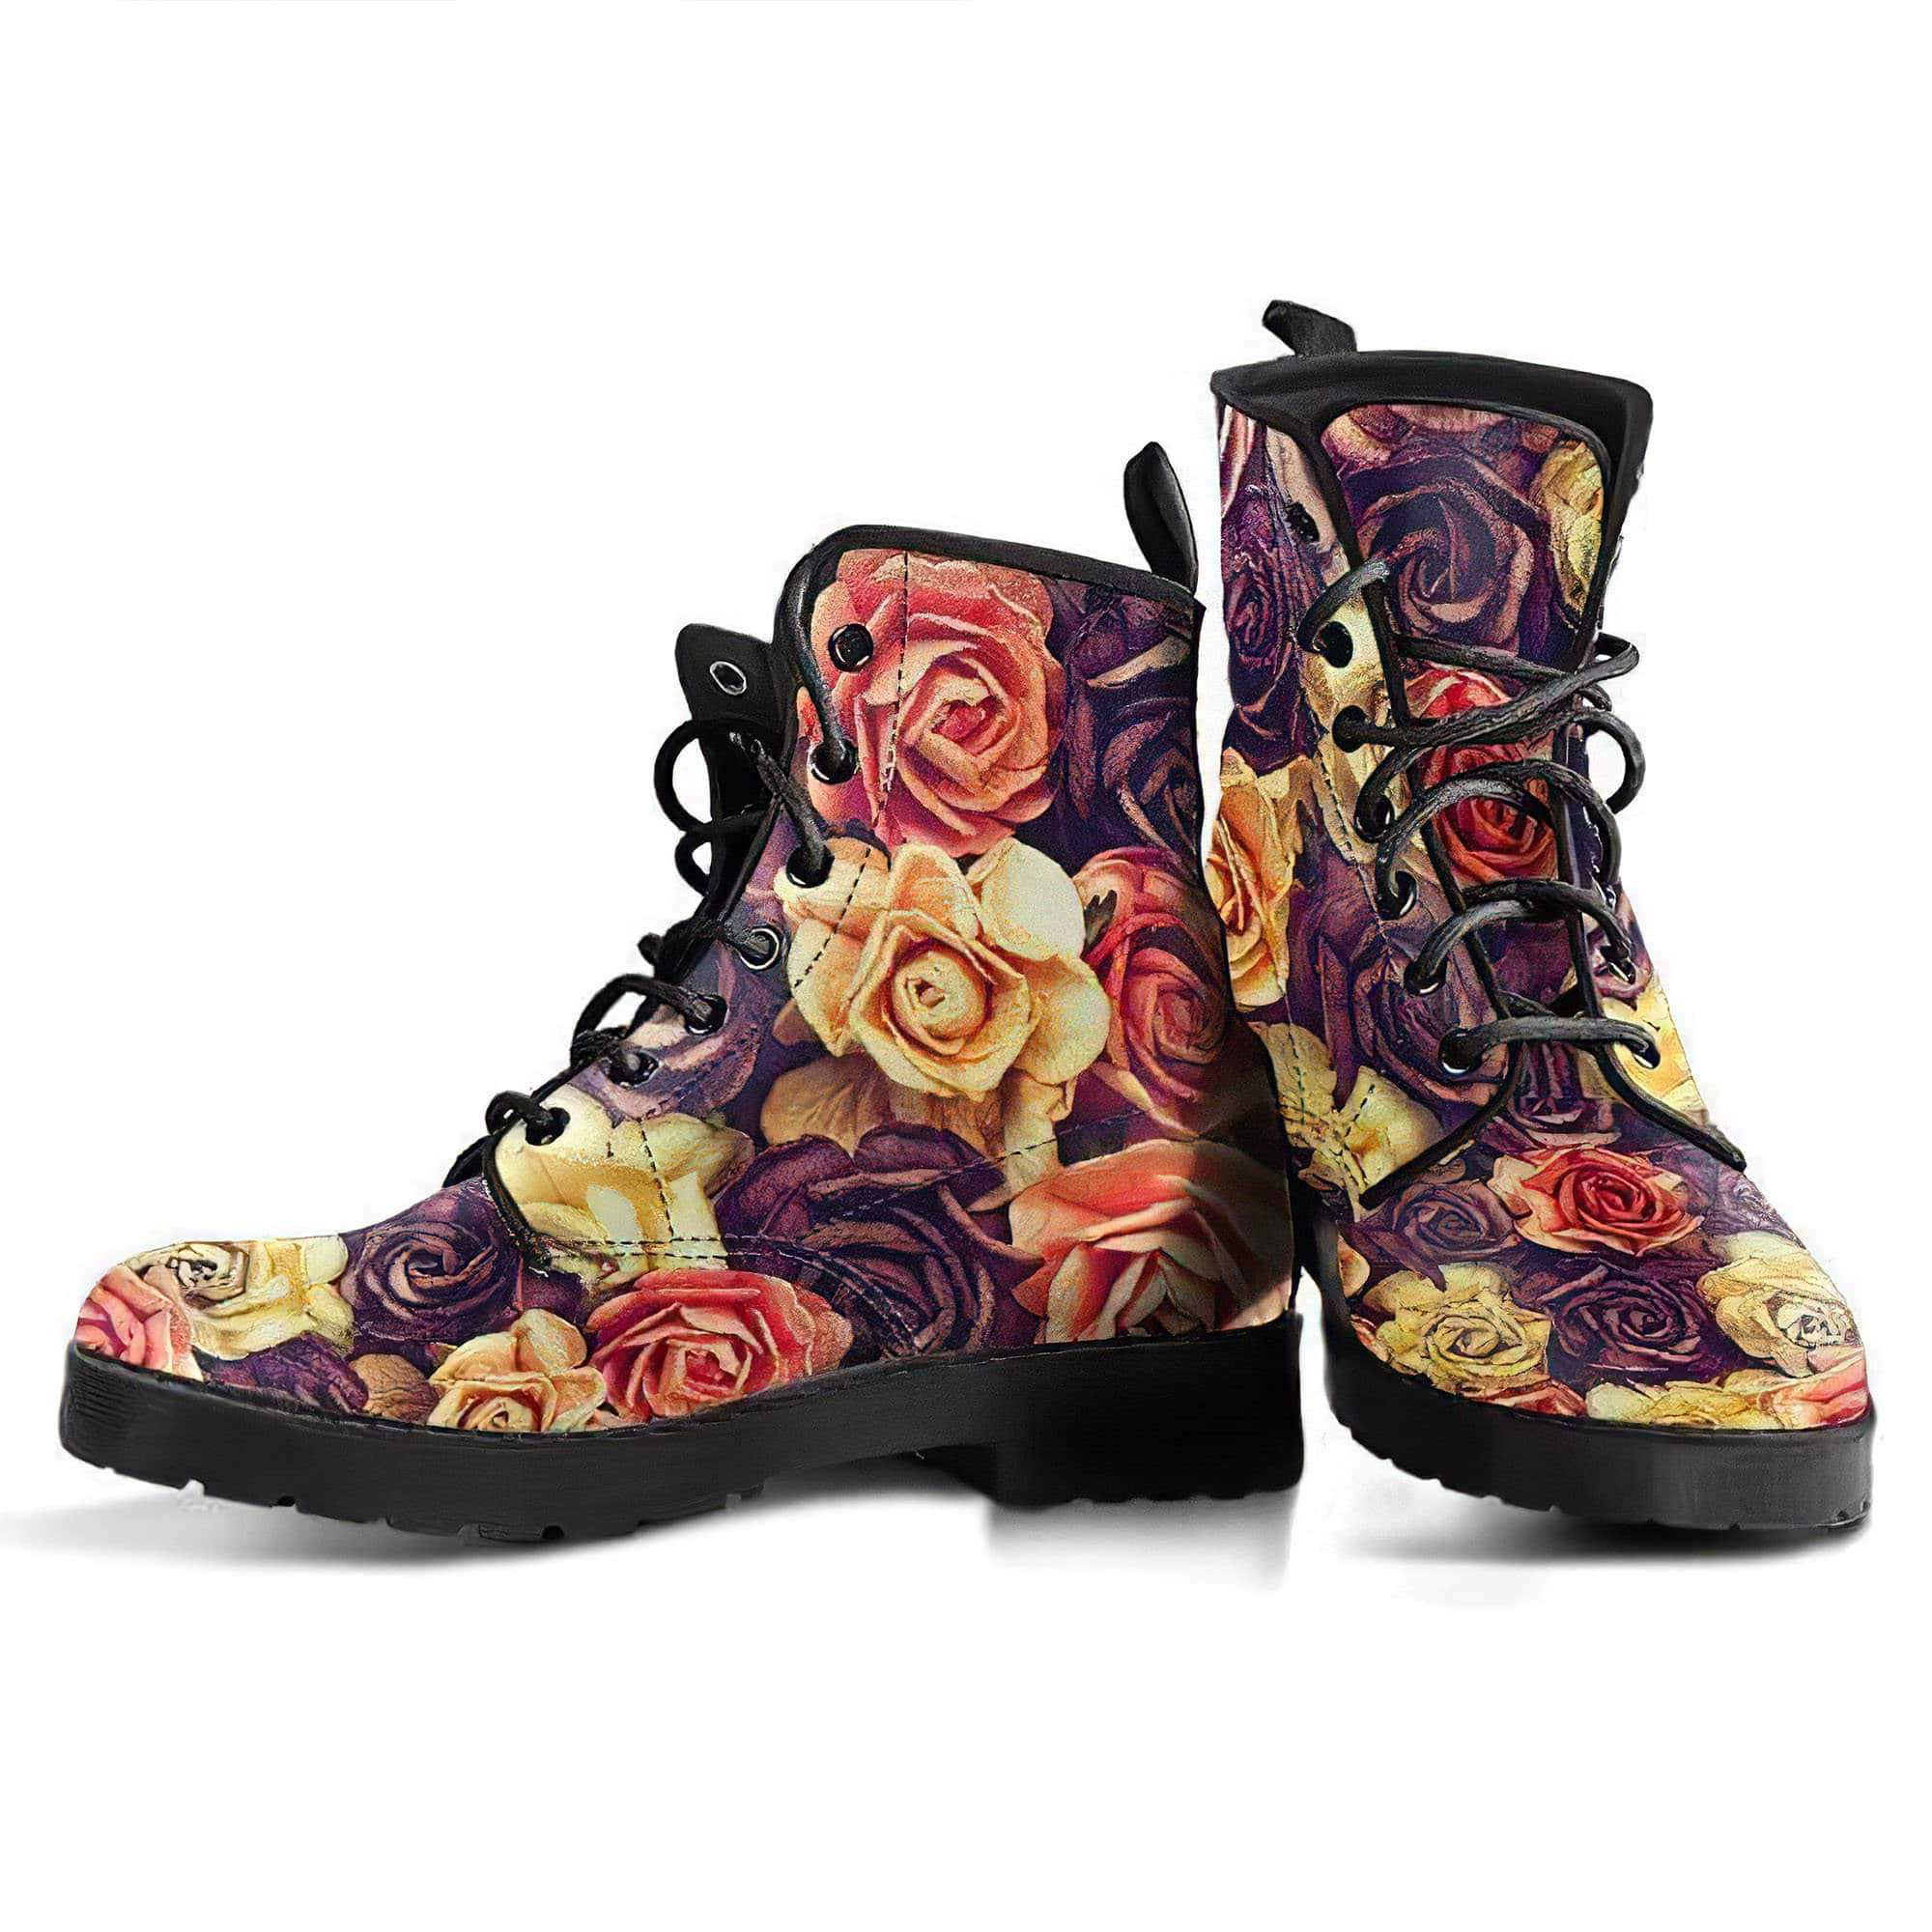 vintage-roses-dried-leather-boots-for-women-women-s-leather-boots-12051972882493.jpg